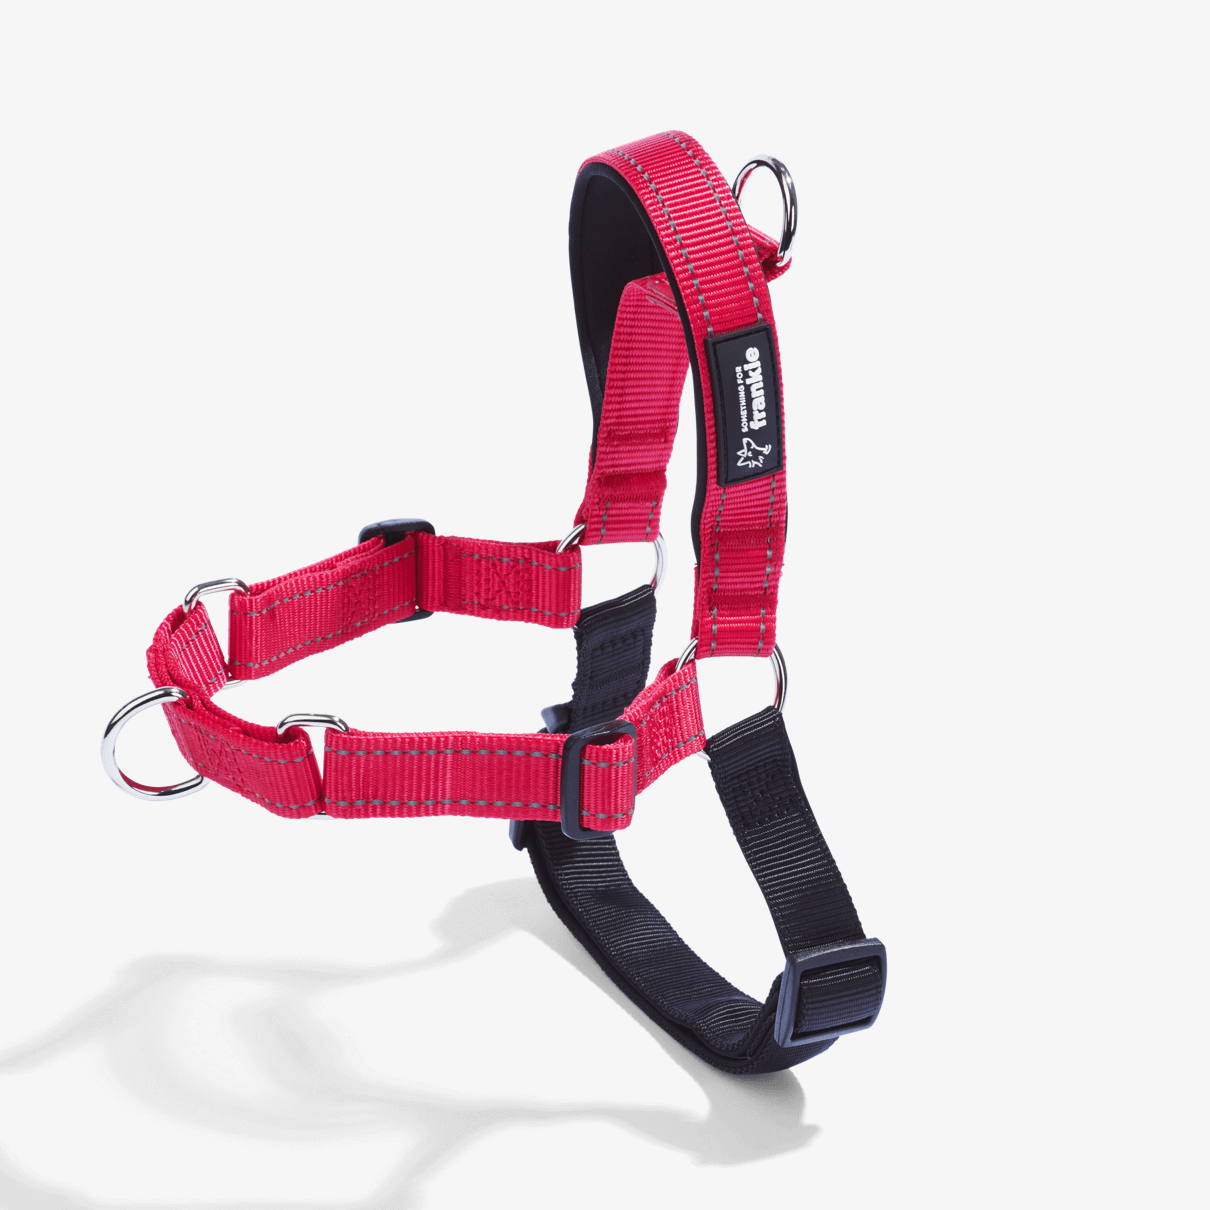 Stress-free walking with our proven No-pull Harness